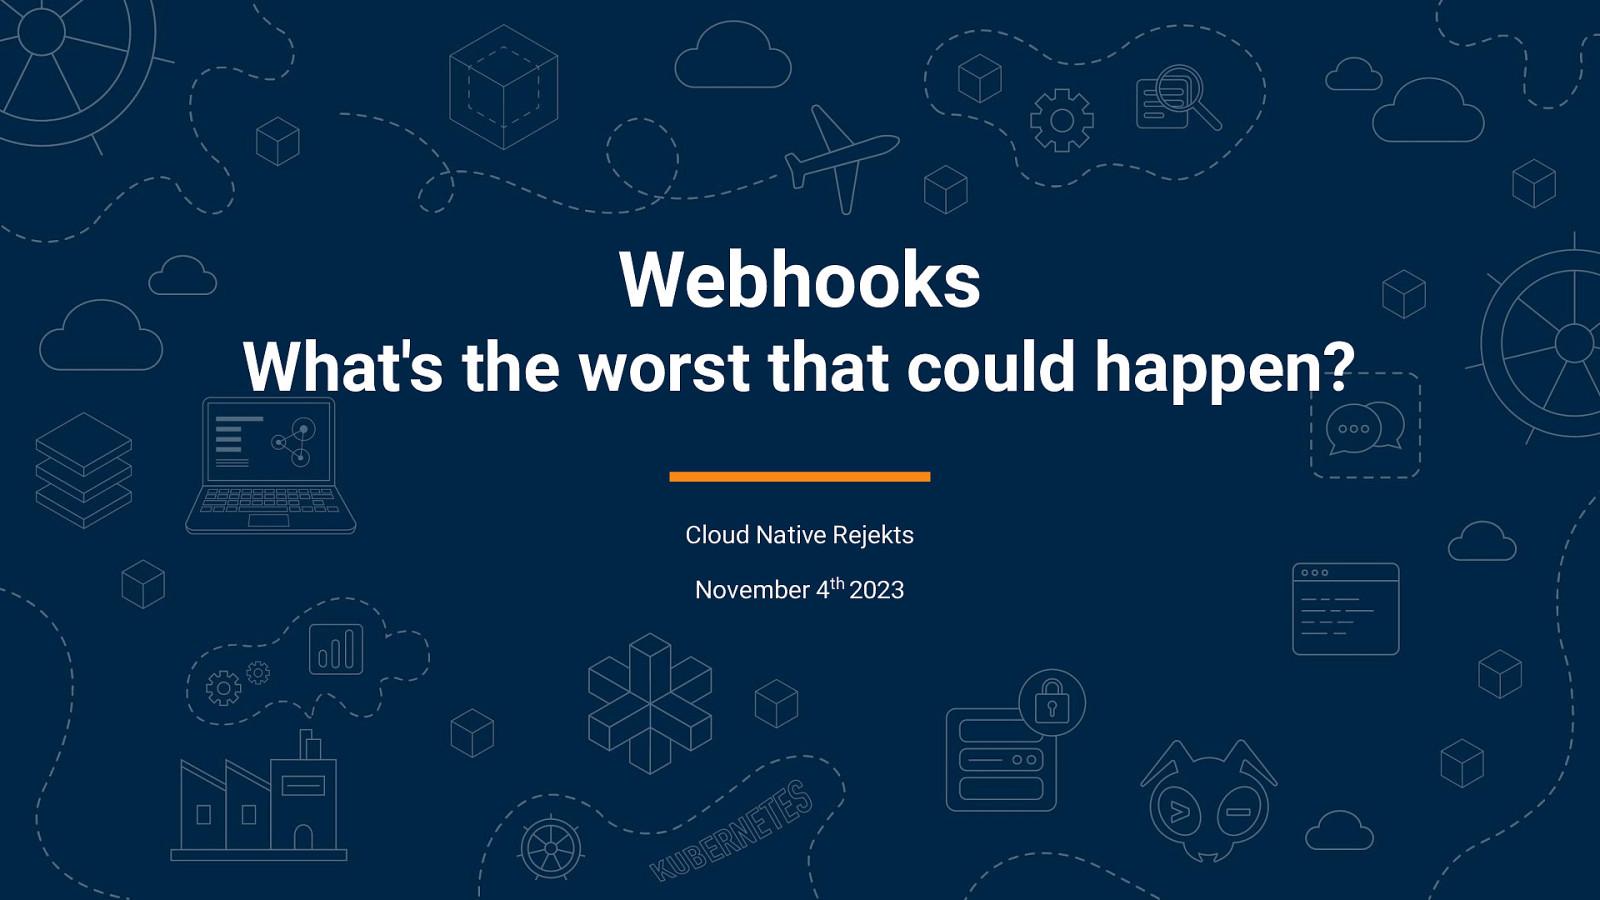 Webhooks - What’s the worst that could happen?